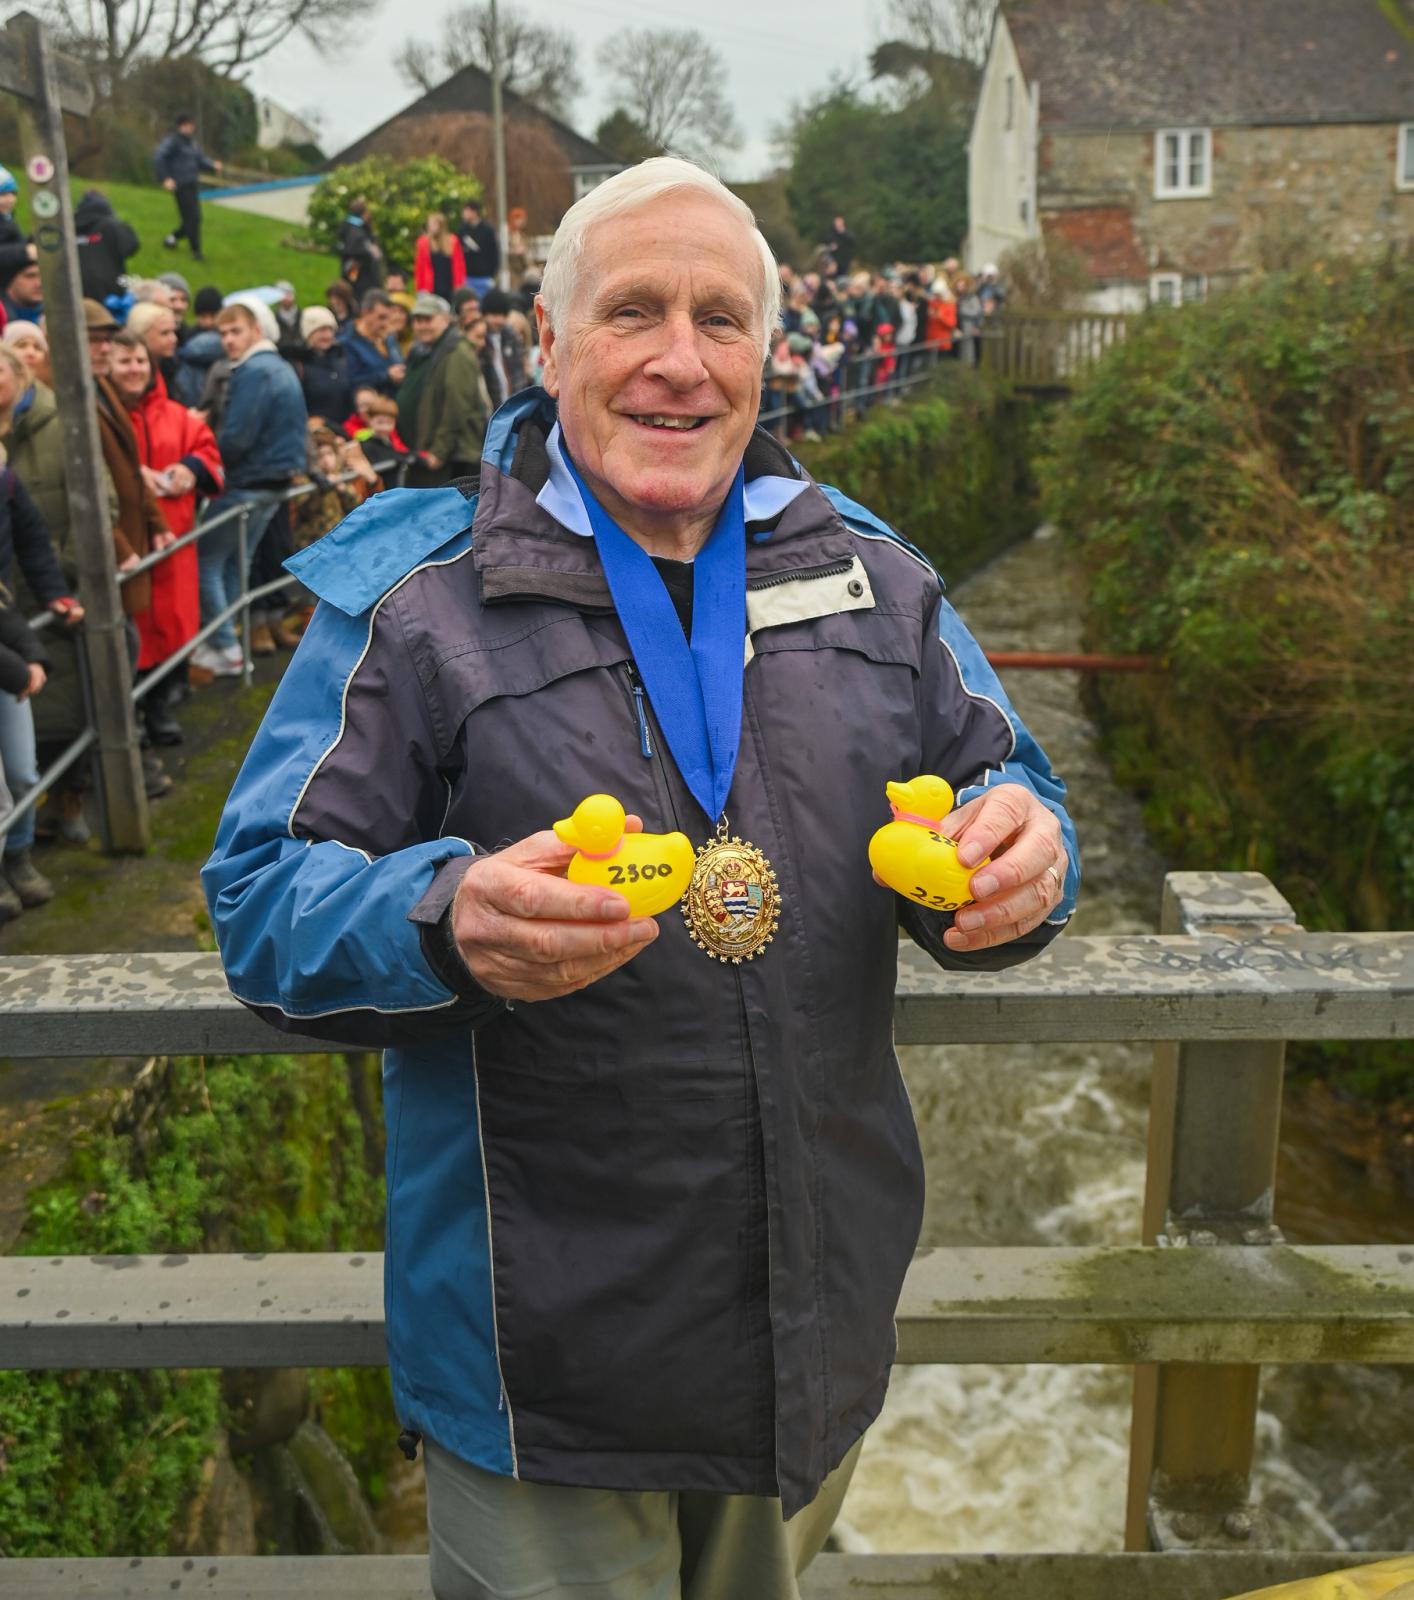 Cllr David Sarson, Mayor of Lyme Regis at the New Year's Day Duck Race